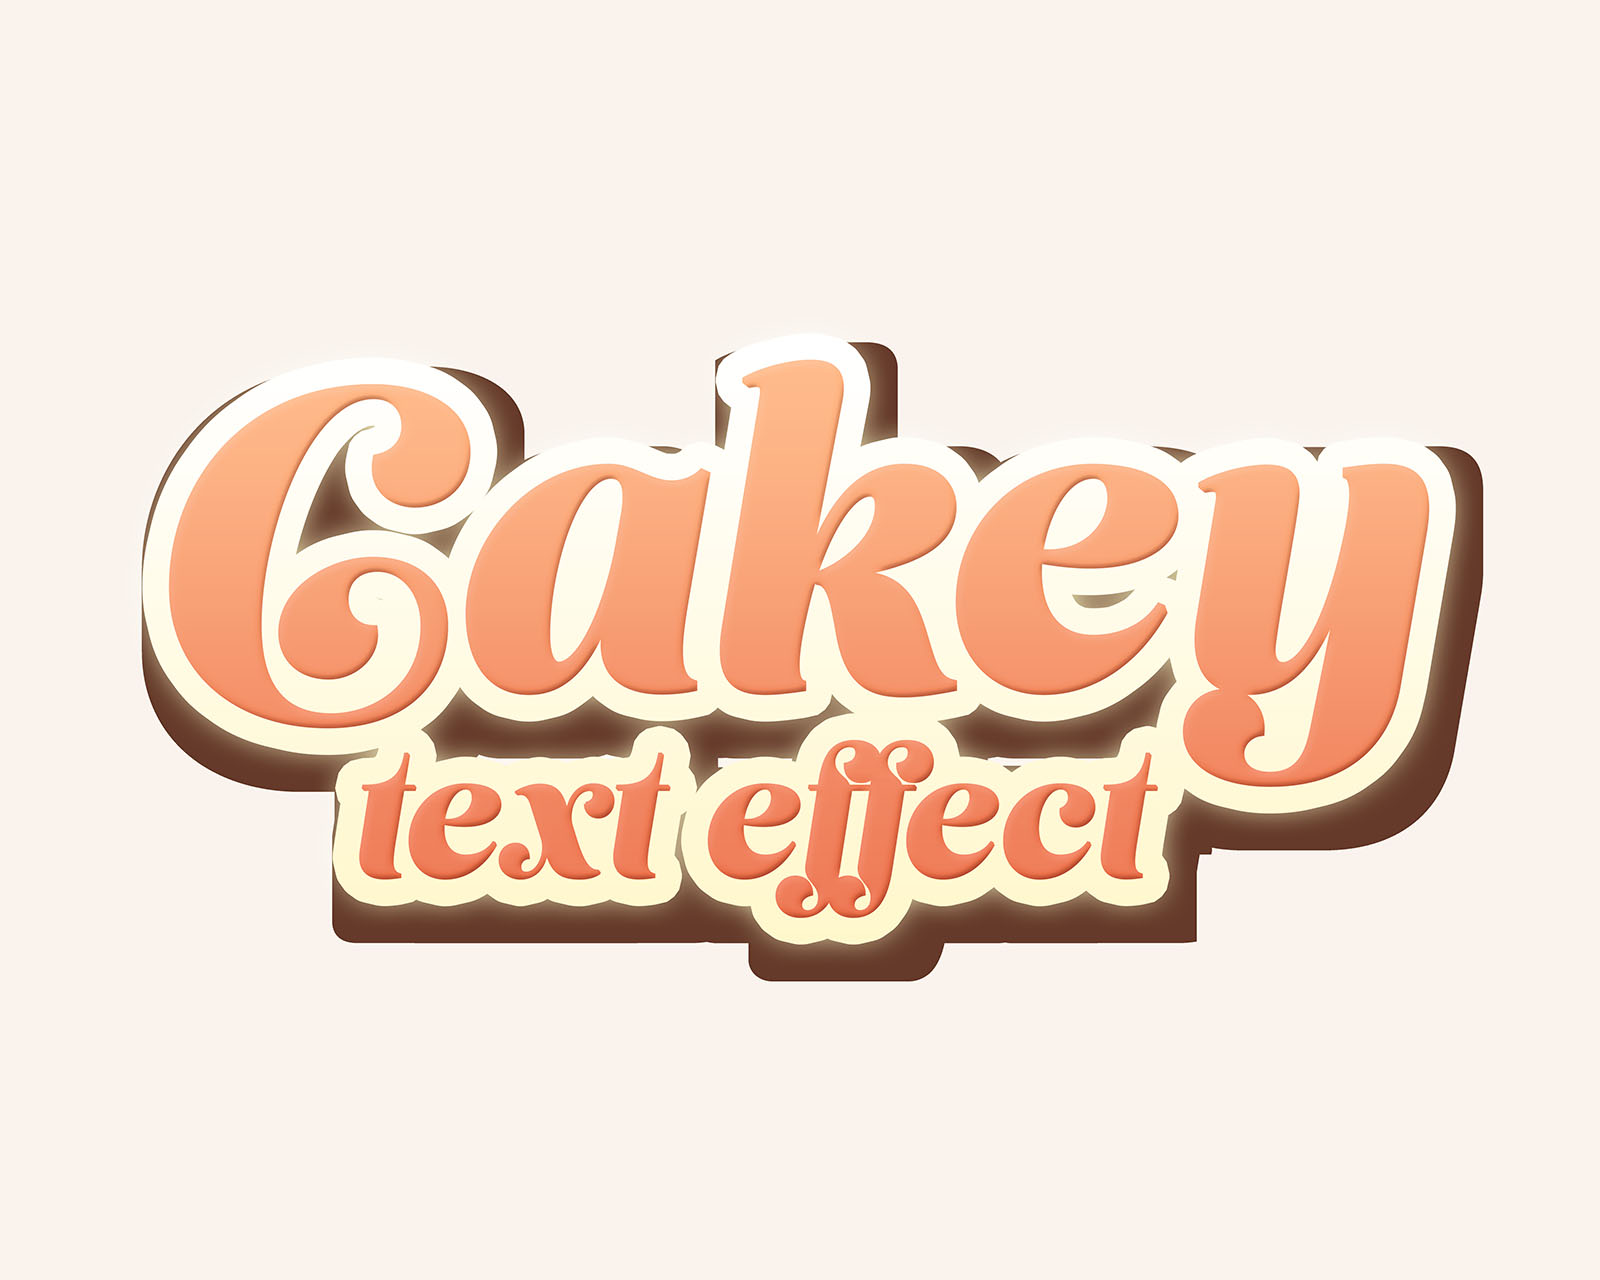 Yummy Photoshop text effects and styles - Bakery